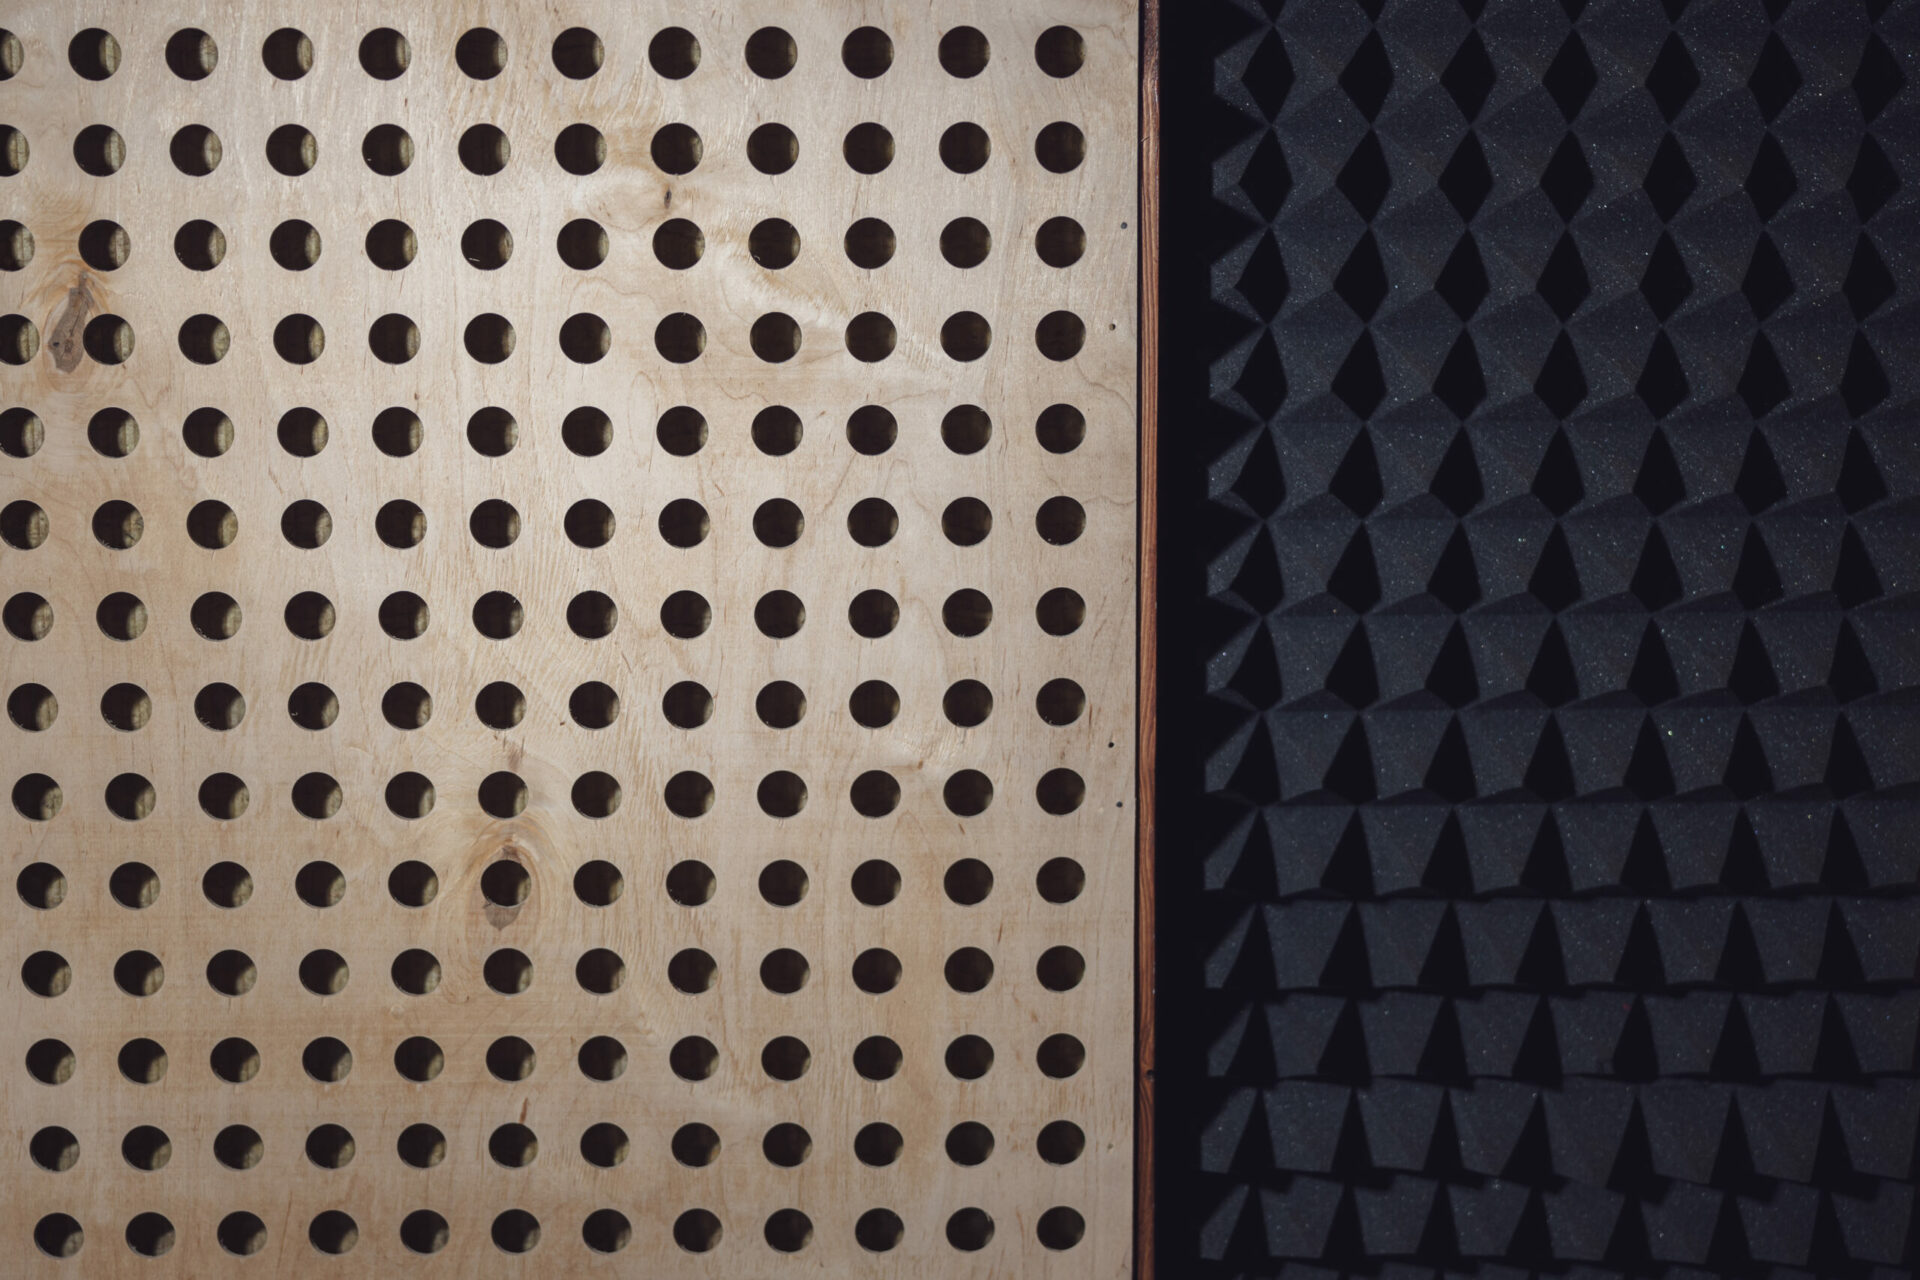 Wooden surface with round holes and black soundproof wall with acoustic dampening foam. Texture, pattern, background. Close-up of sound proof coverage in music sound recording studio.